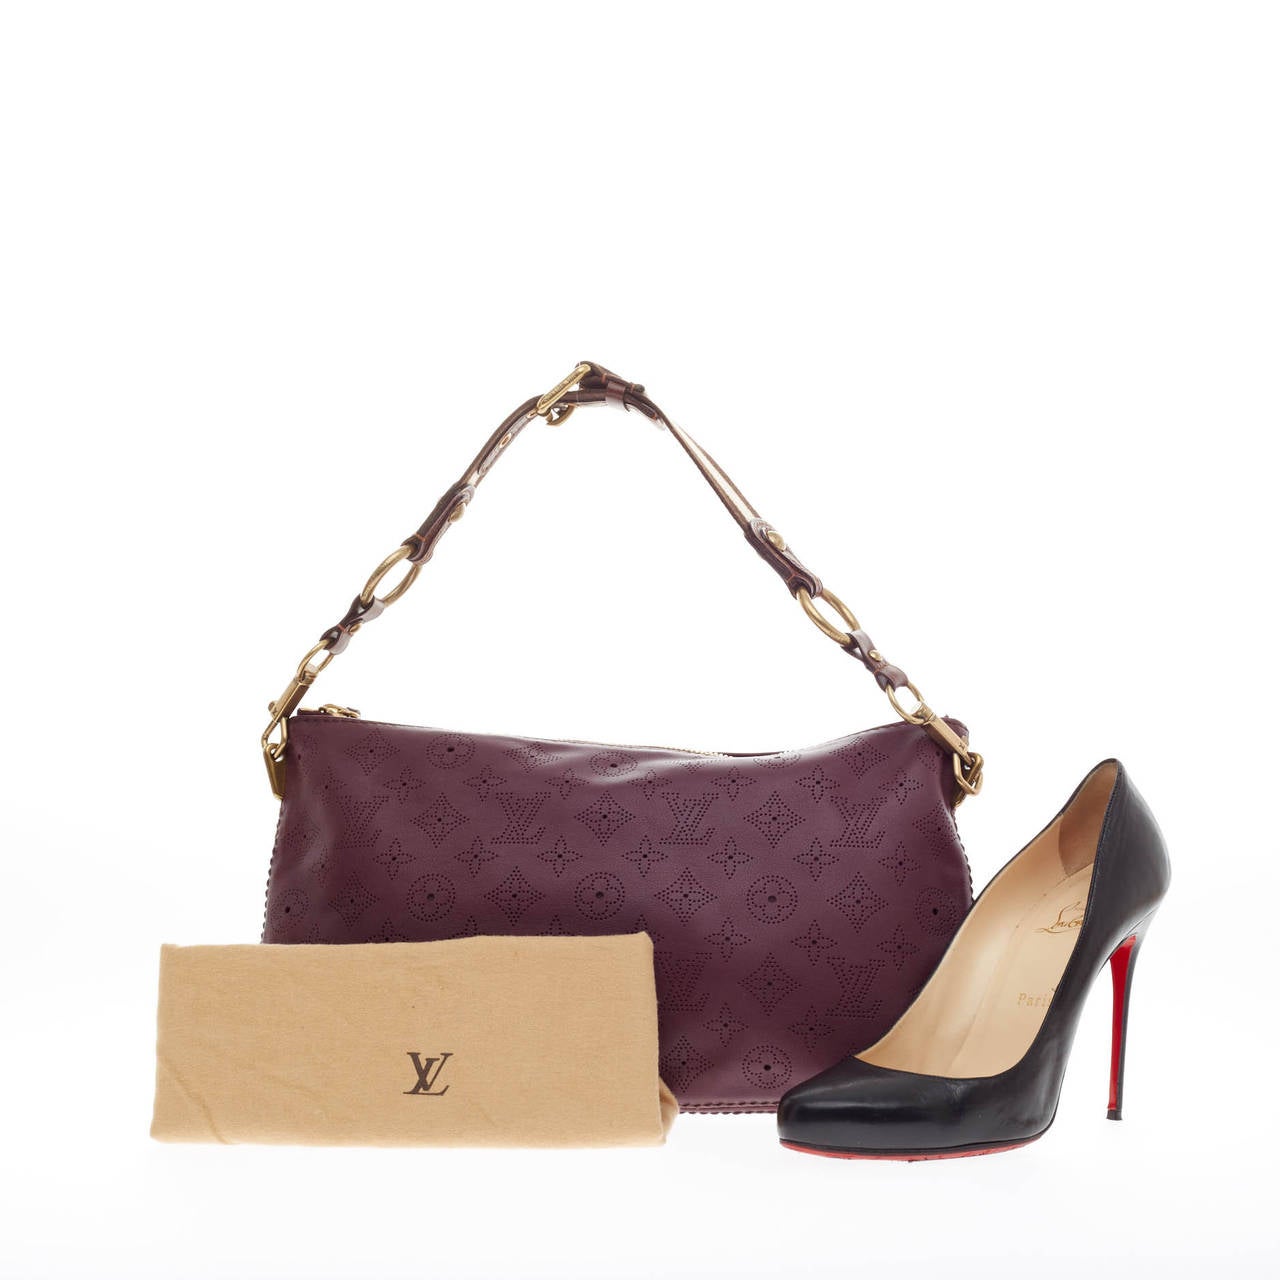 This authentic Louis Vuitton Onatah Pochette Mahina Leather is the perfect accessory to store your everyday essentials. Crafted from deep plum purple perforated monogram leather, this chic oversized pochette features detachable shoulder strap and